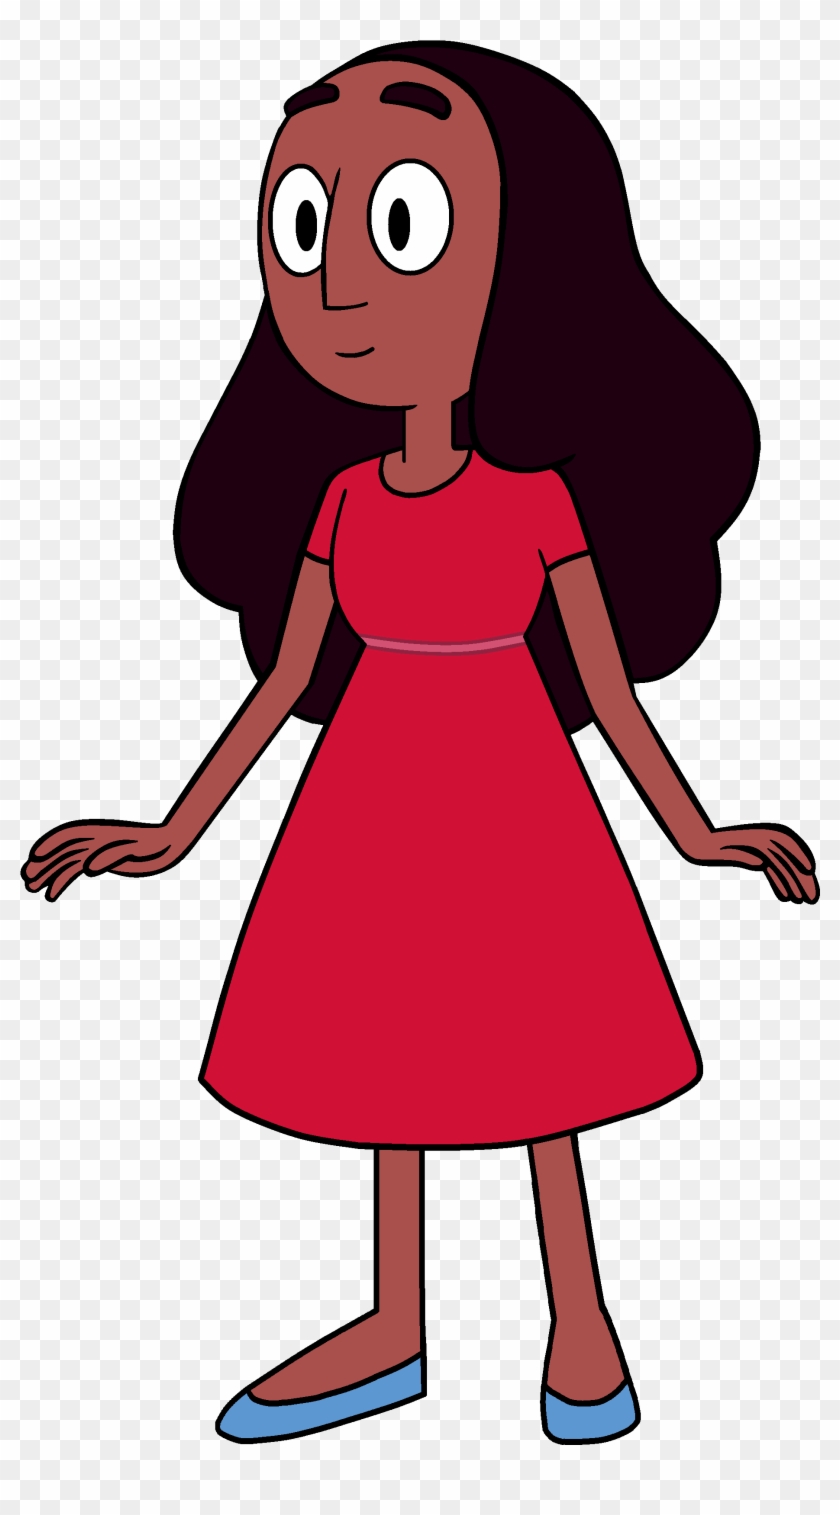 Steven's Birthday Connie Model - Steven Universe Characters Connie Clipart #5605849